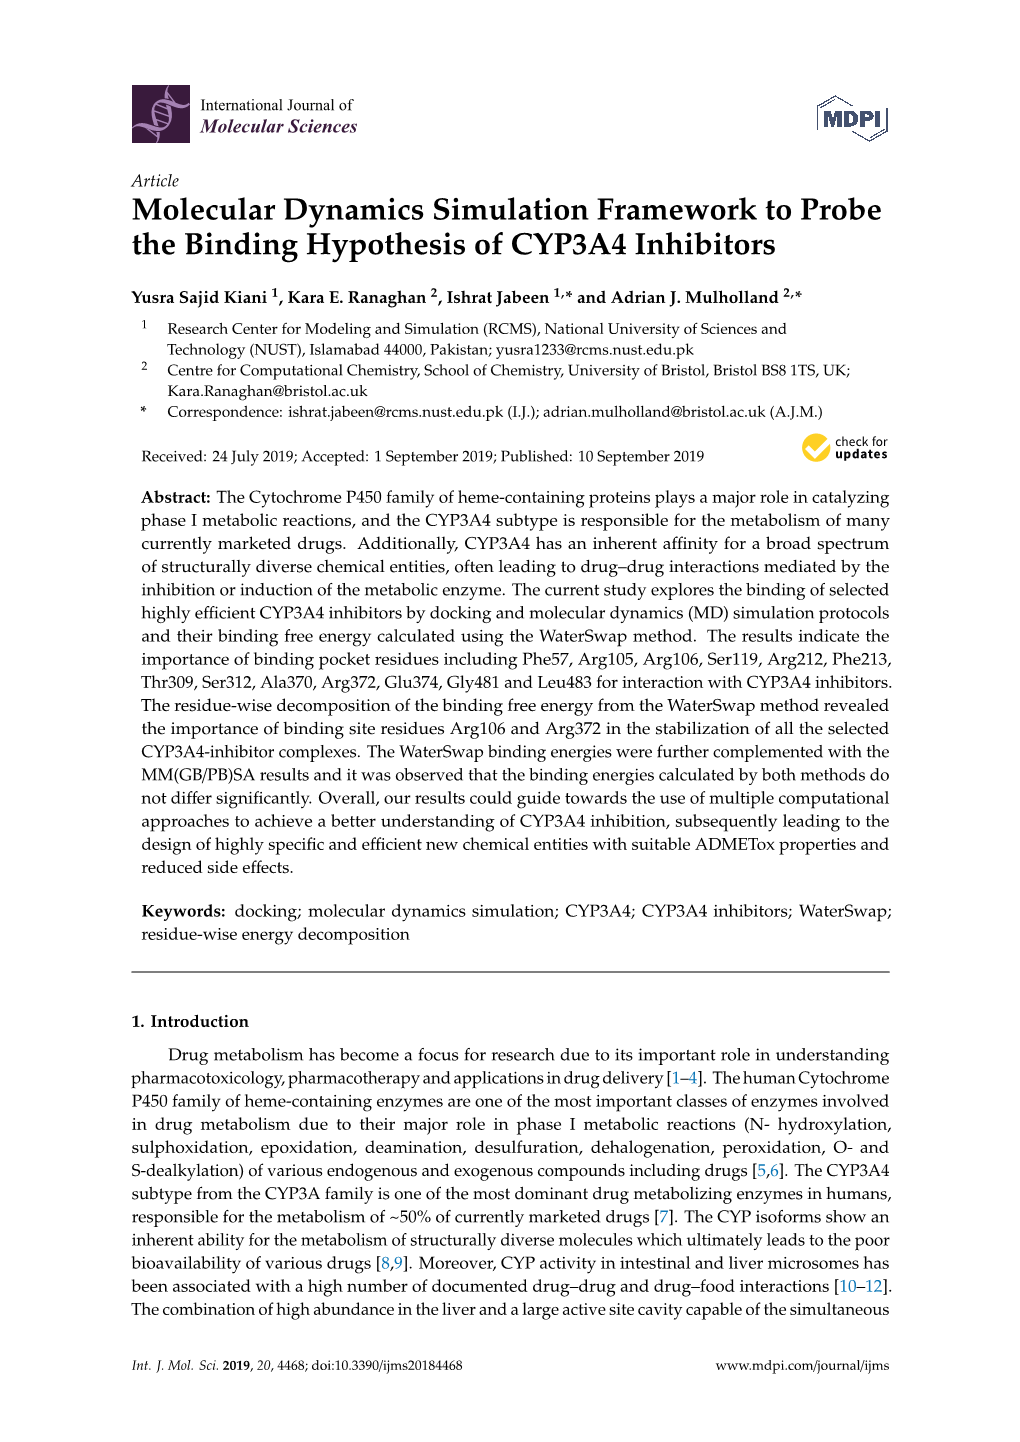 Molecular Dynamics Simulation Framework to Probe the Binding Hypothesis of CYP3A4 Inhibitors